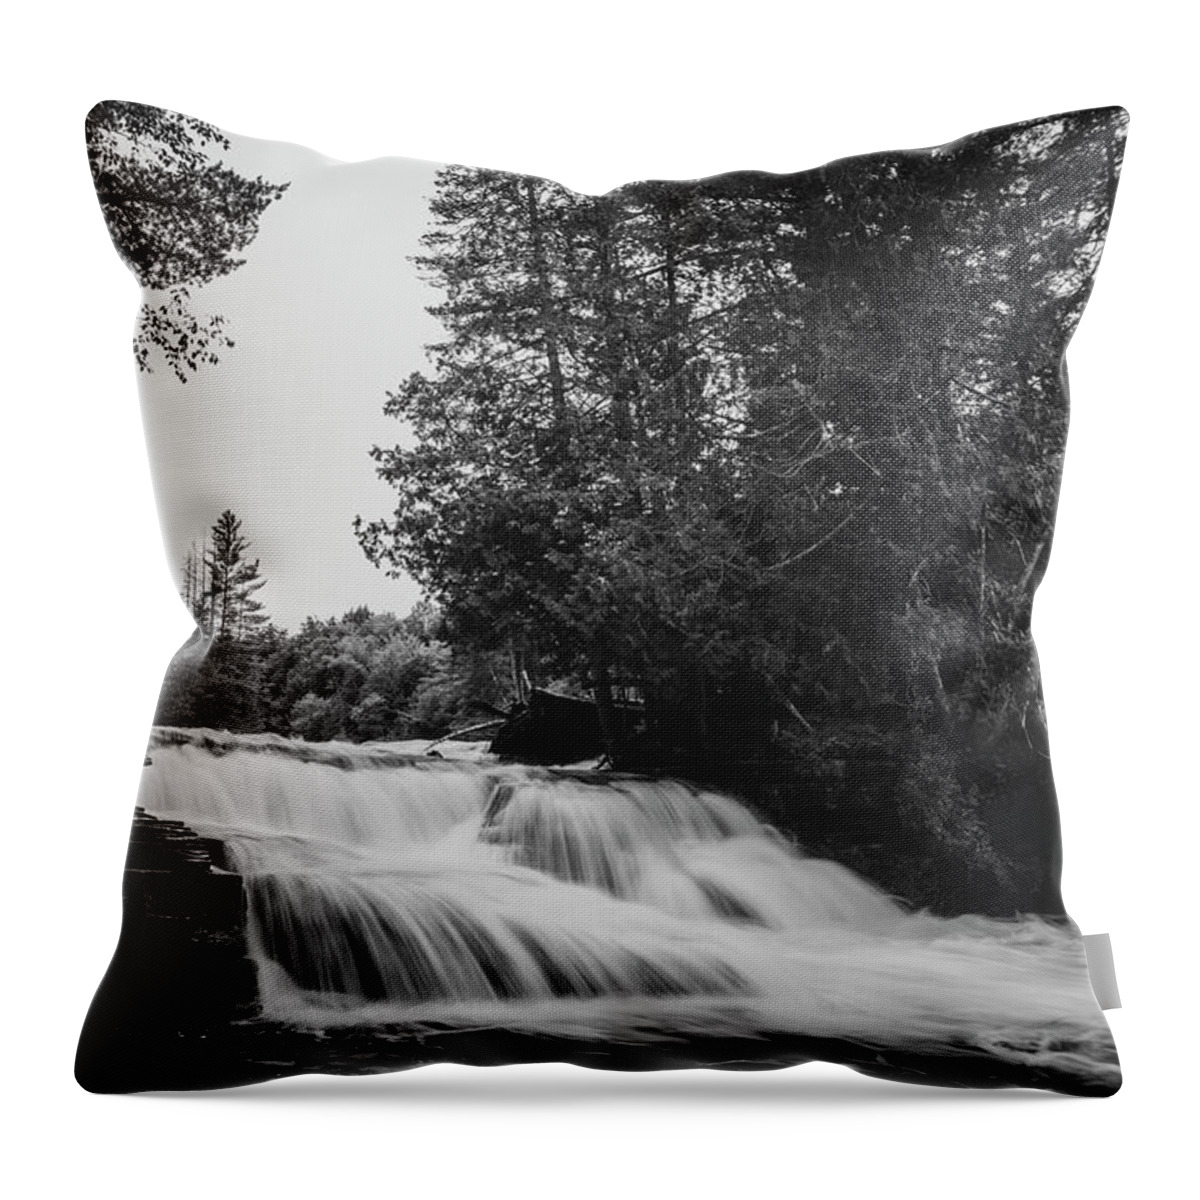 Tahquamenon Falls Black And White Lower Falls Throw Pillow featuring the photograph Tahquamenon Falls Lower Black And White by Dan Sproul